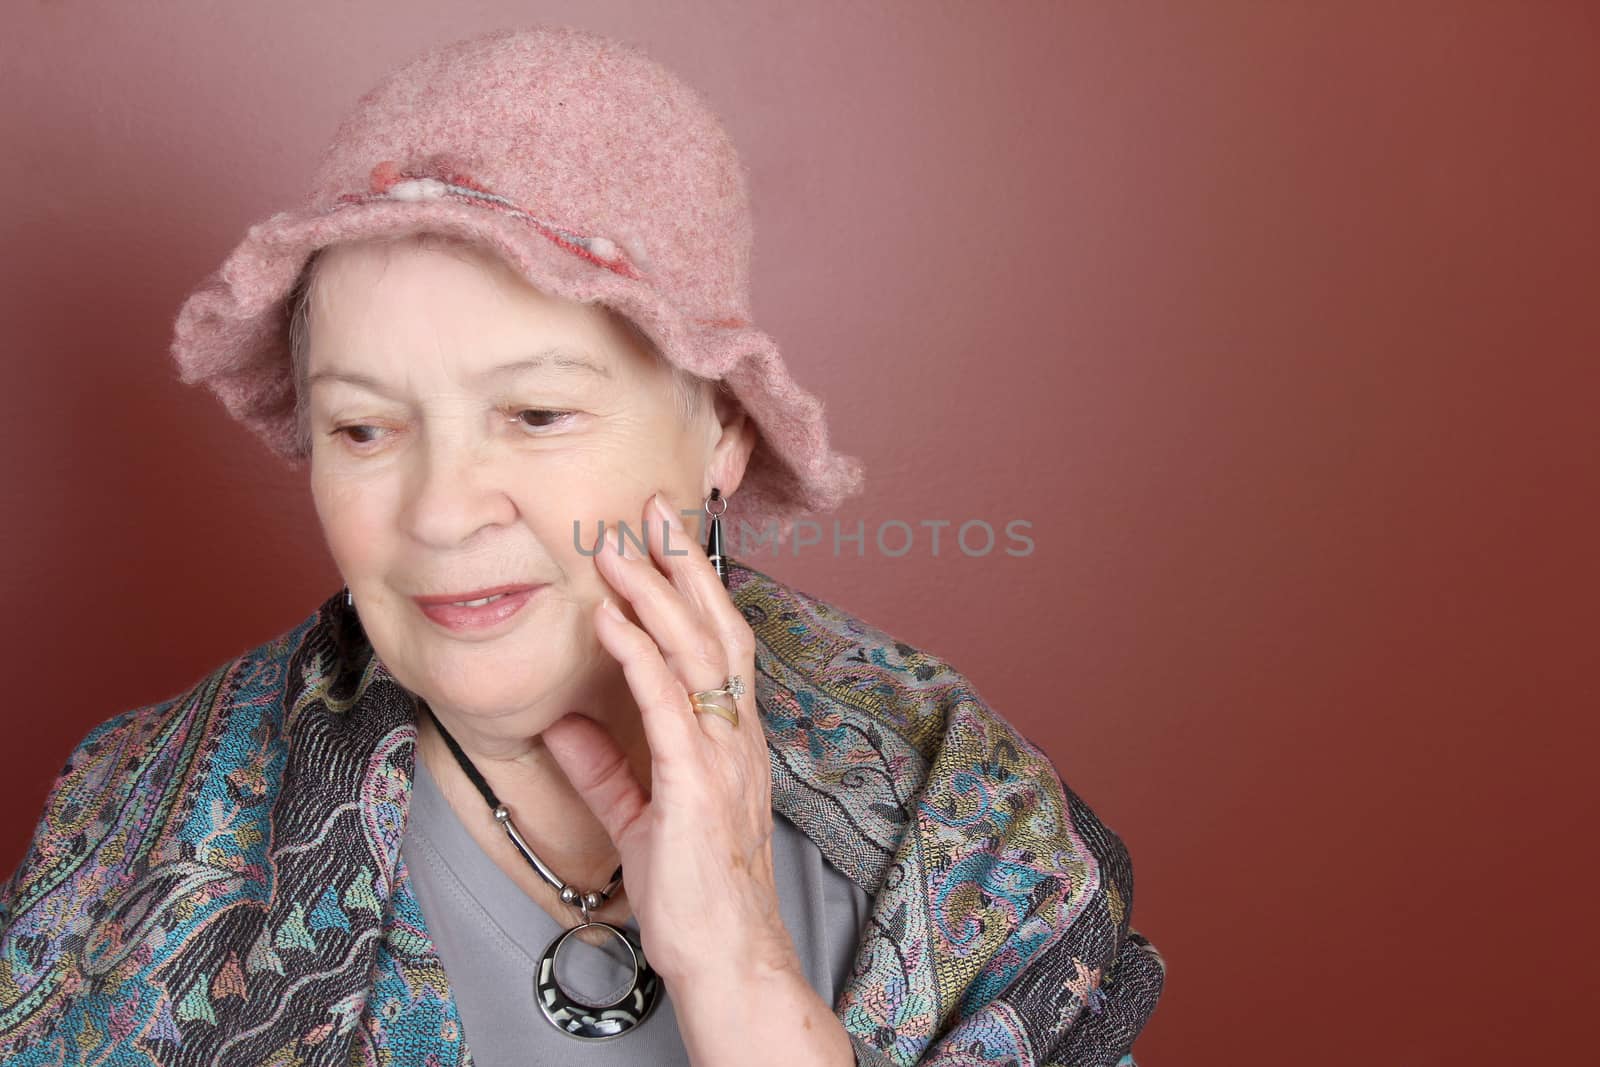 Senior lady wearing a pink hat in studio setting